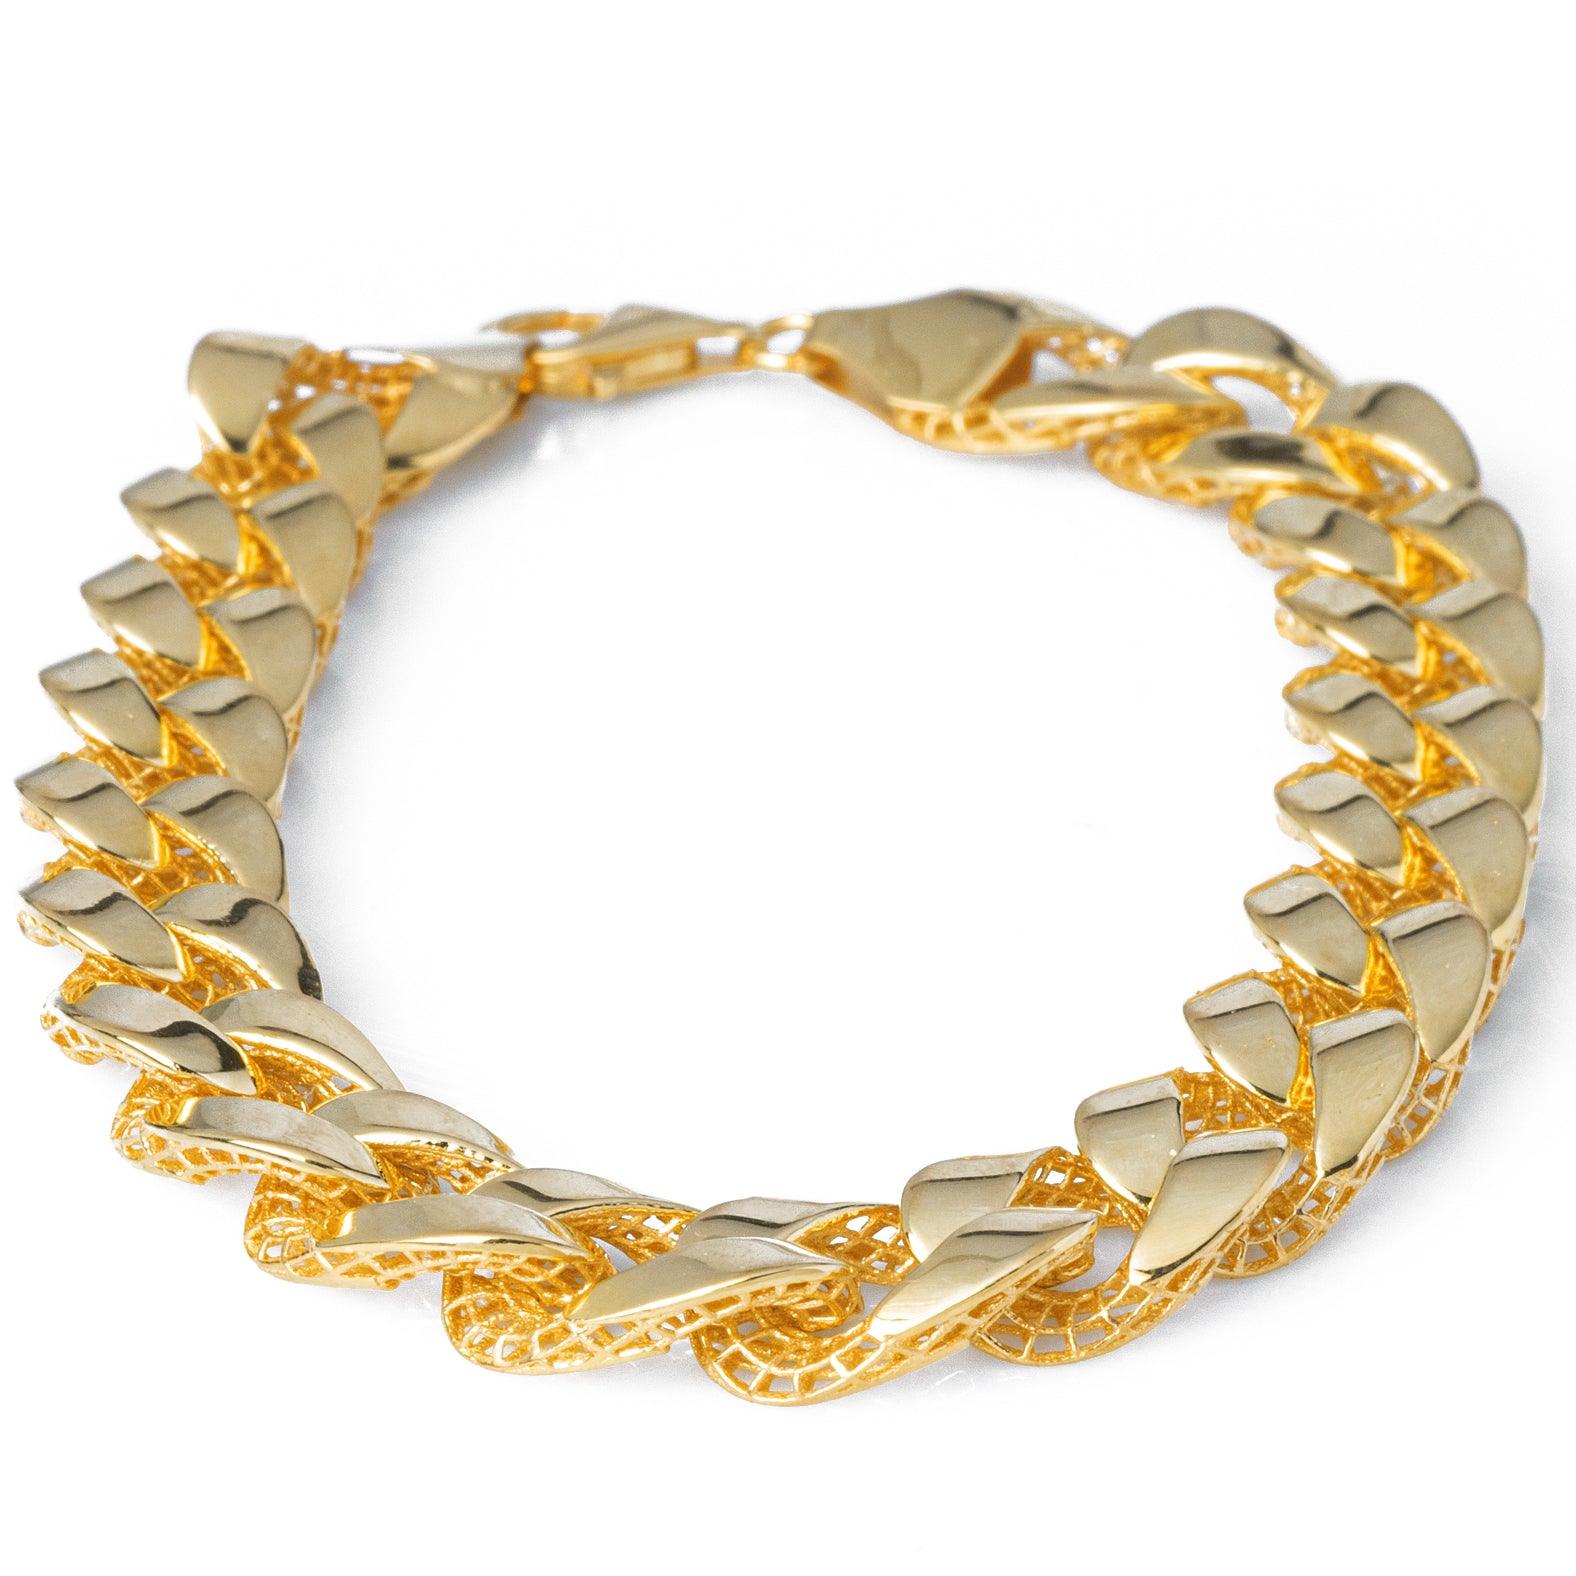 22ct Gold Curb Link Gents Bracelet with Mirror Finish and Mesh Support Backing fitted with a Lobster Clasp GBR-8042